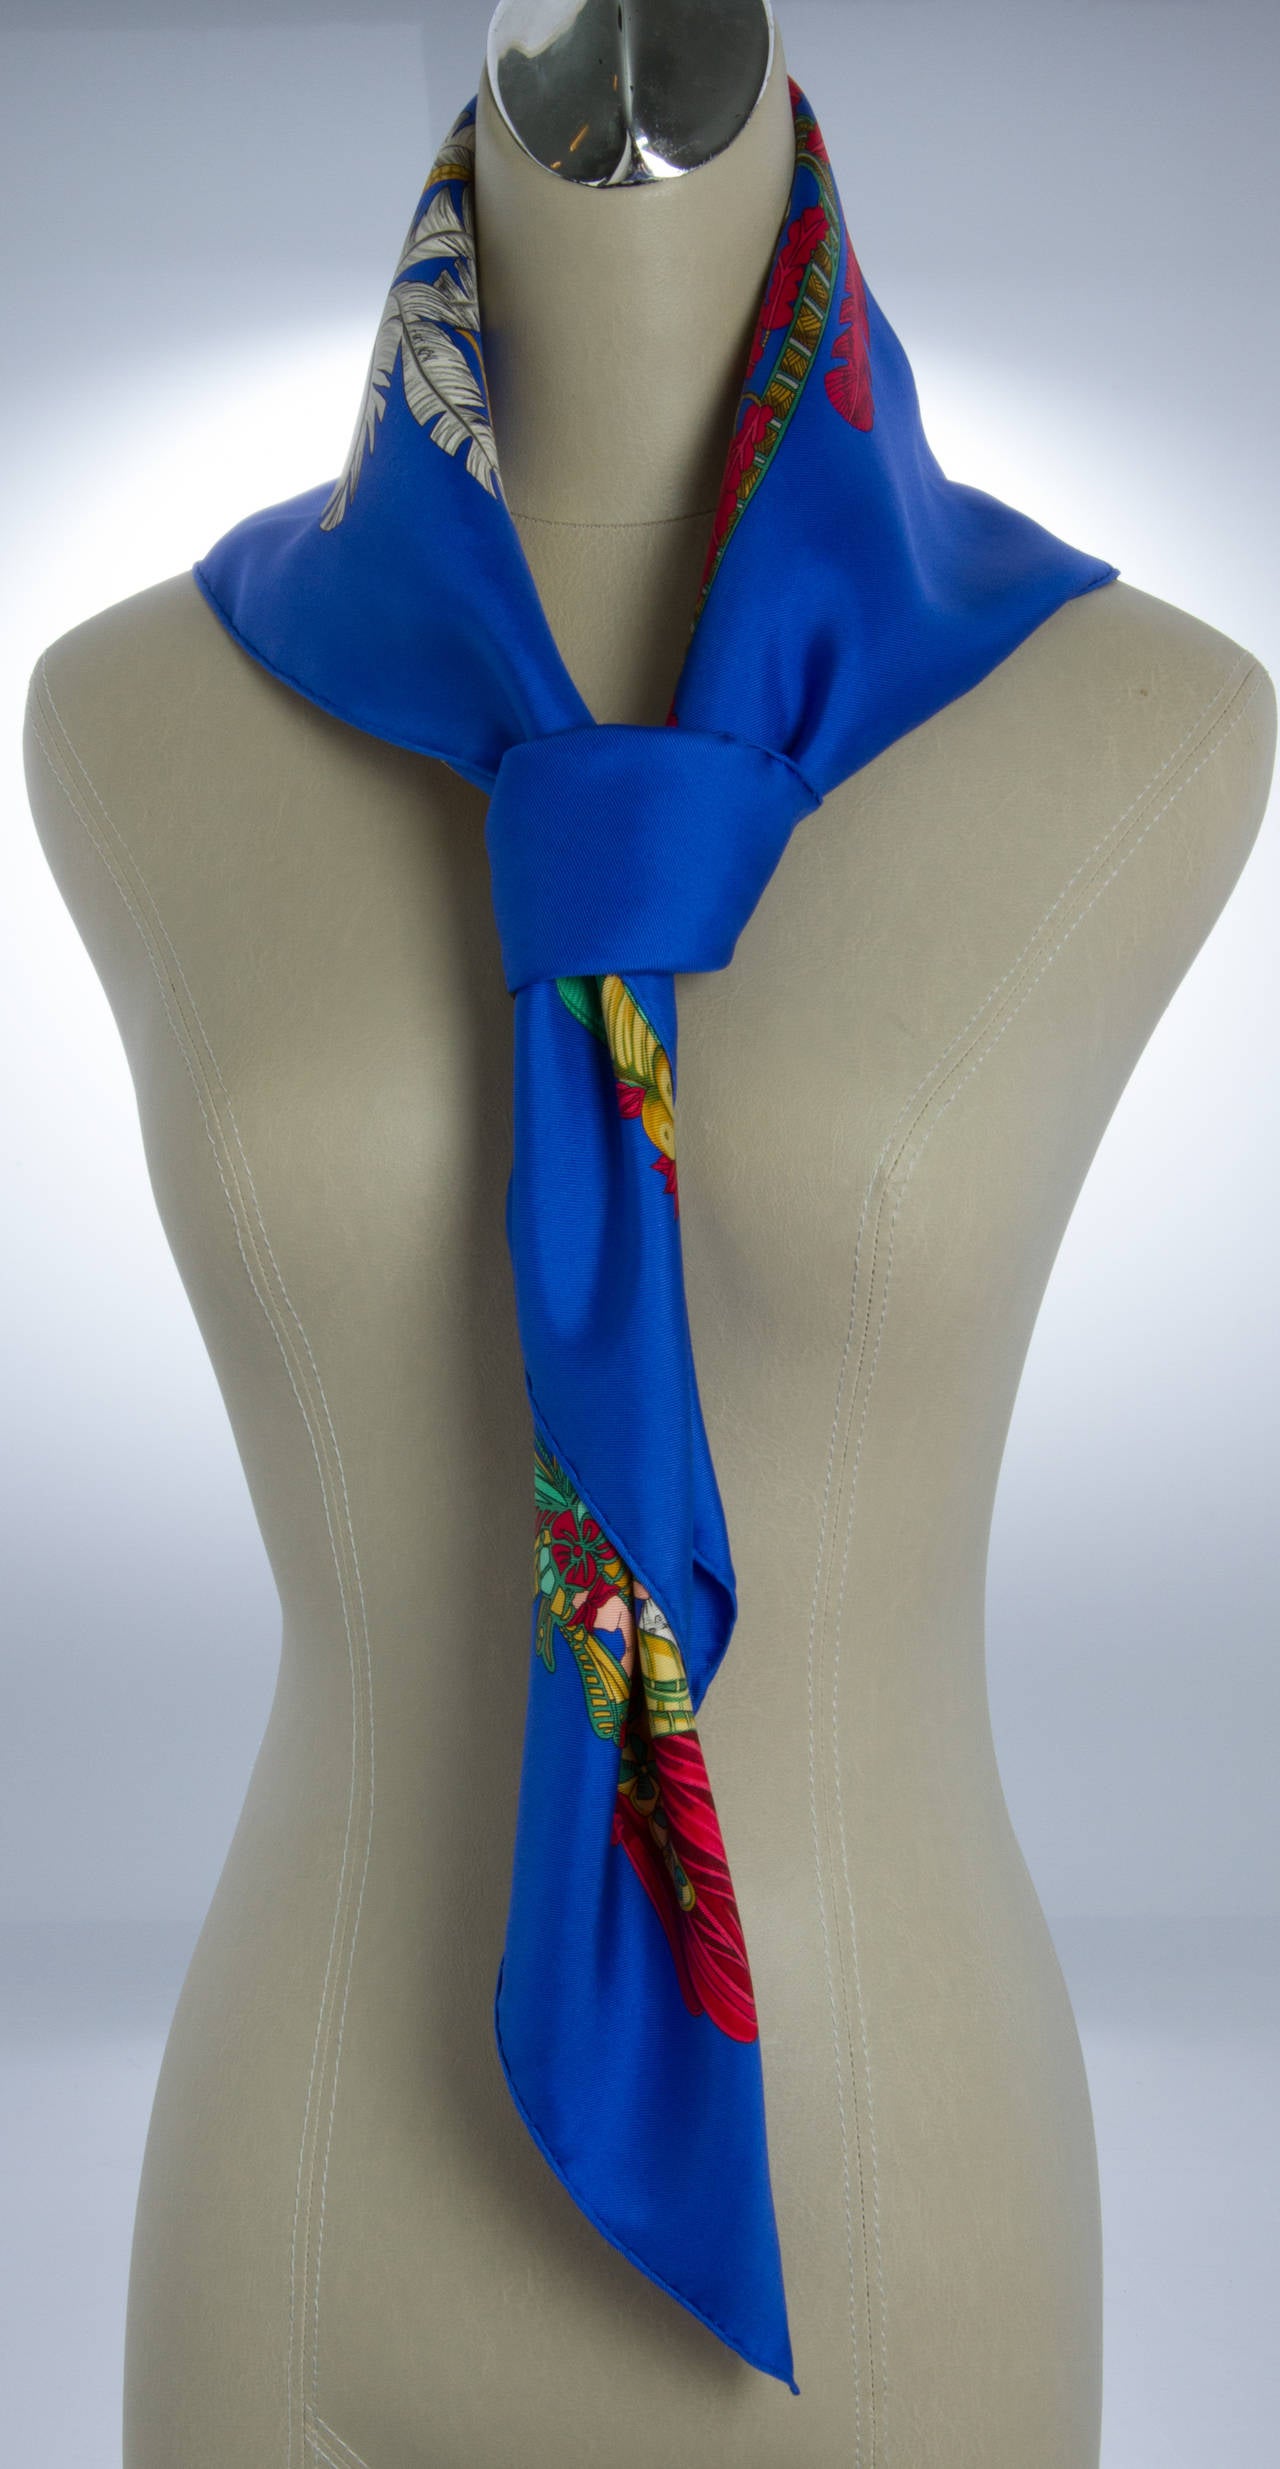 This scarf depicts powdered Baroque wigs, bonnets, and large plume feathers.